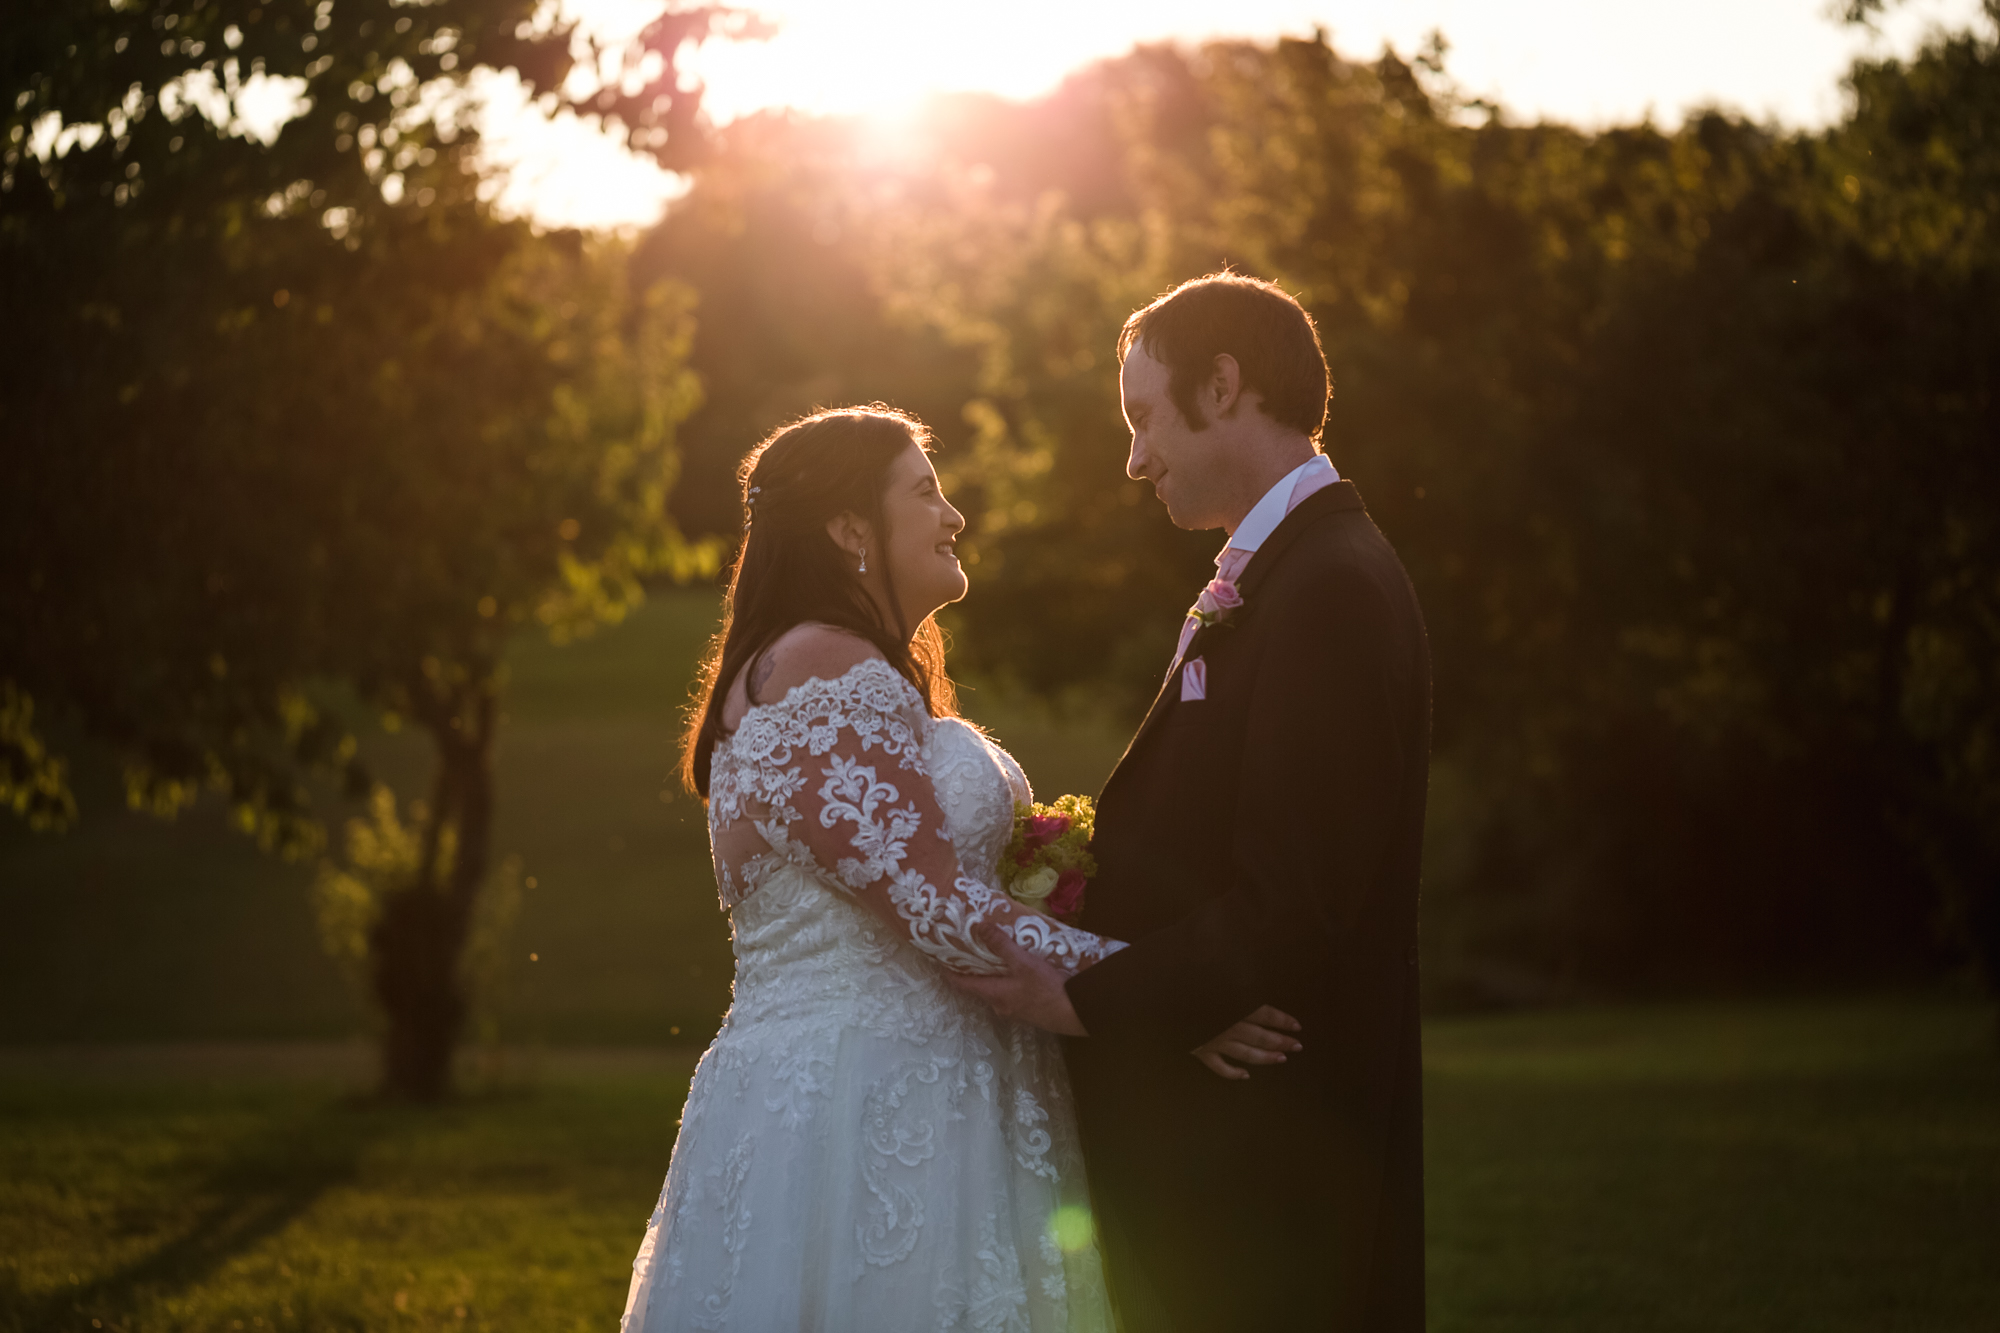 Bride and groom sunset portraits at Ridgeway golf club, Thornhill, Caerphilly Mountain